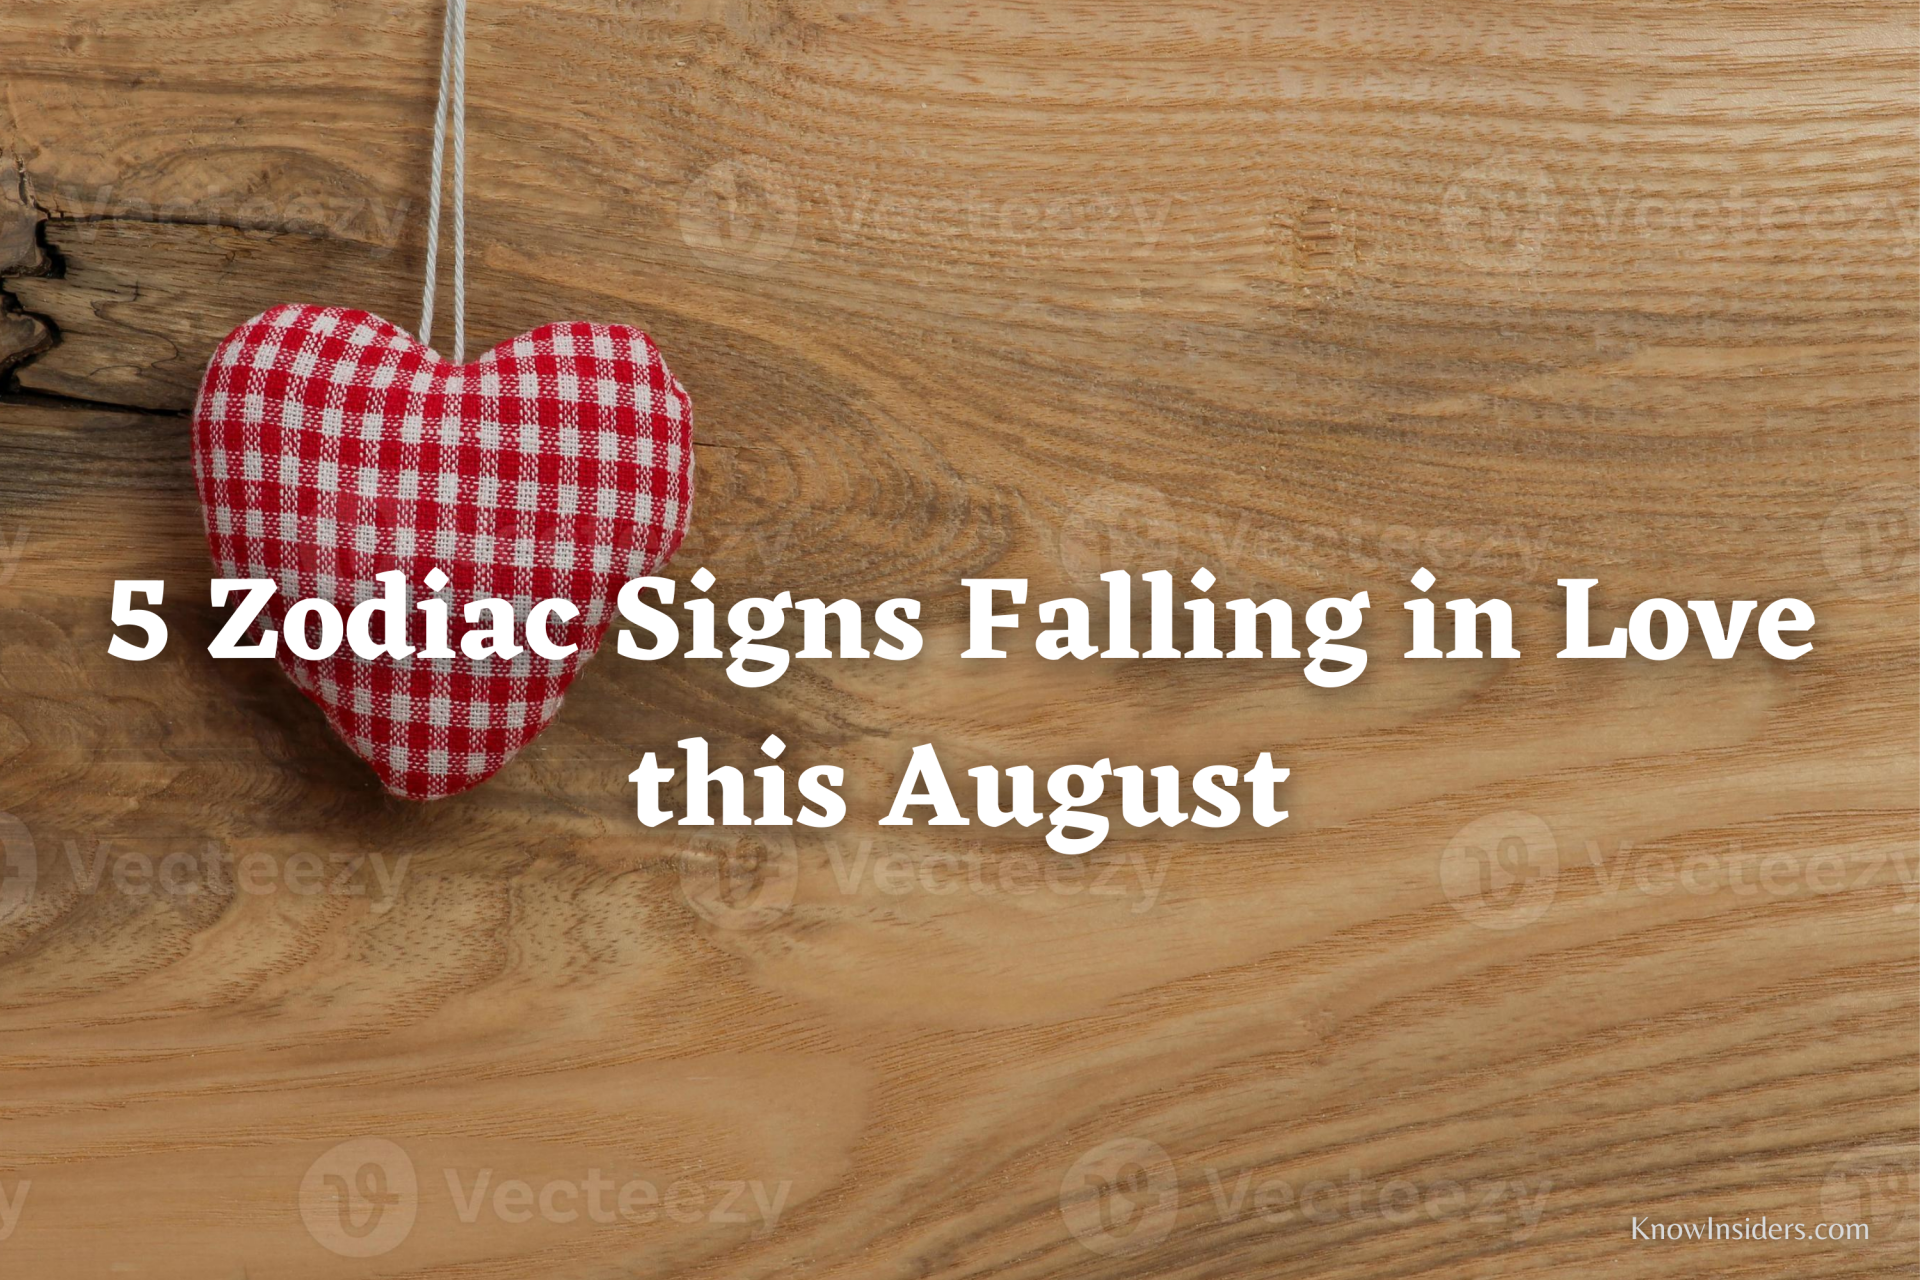 5 Zodiac Signs Will Fall in Love in August - Astrological Prediction